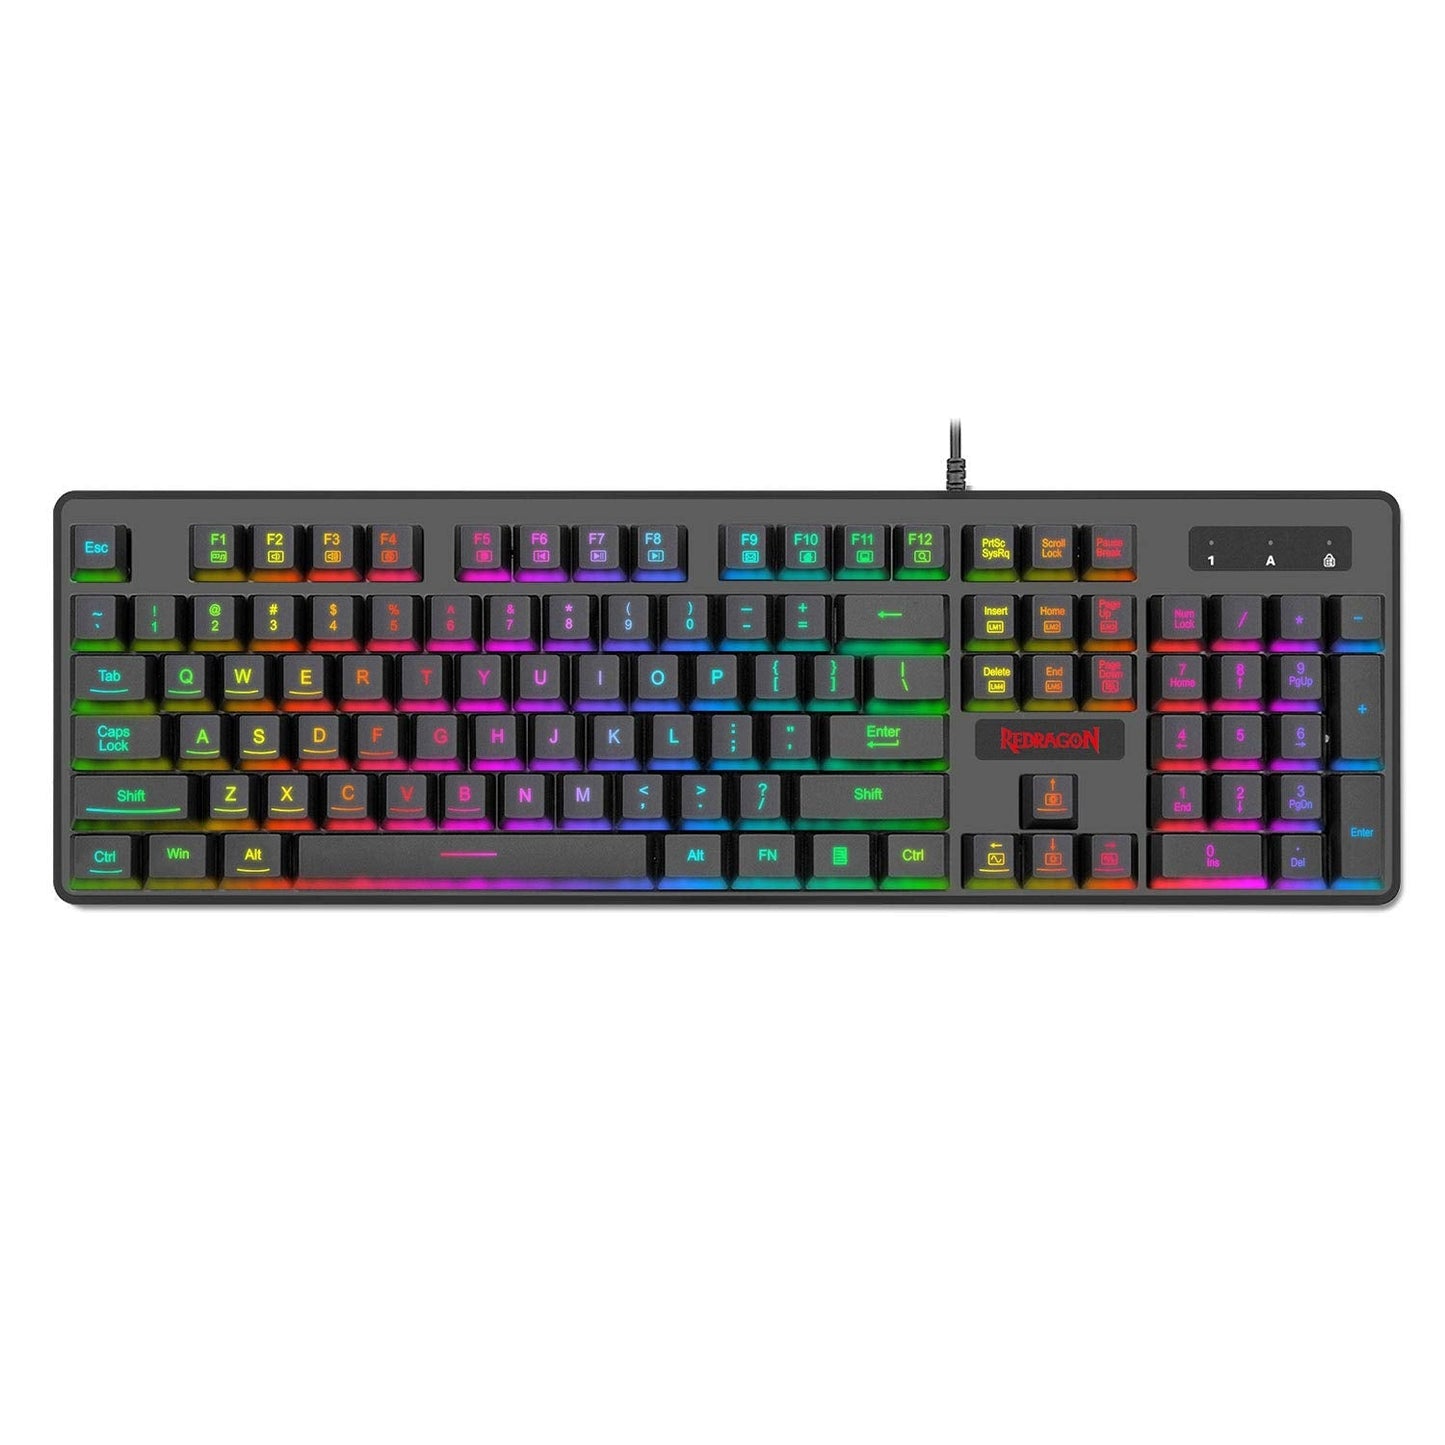 Redragon Dyaus K509 Wired Semi Mechanical Gaming Keyboard with 7 RGB Backlit Colors on Keys & without Edge Side Light Illumination (Black)